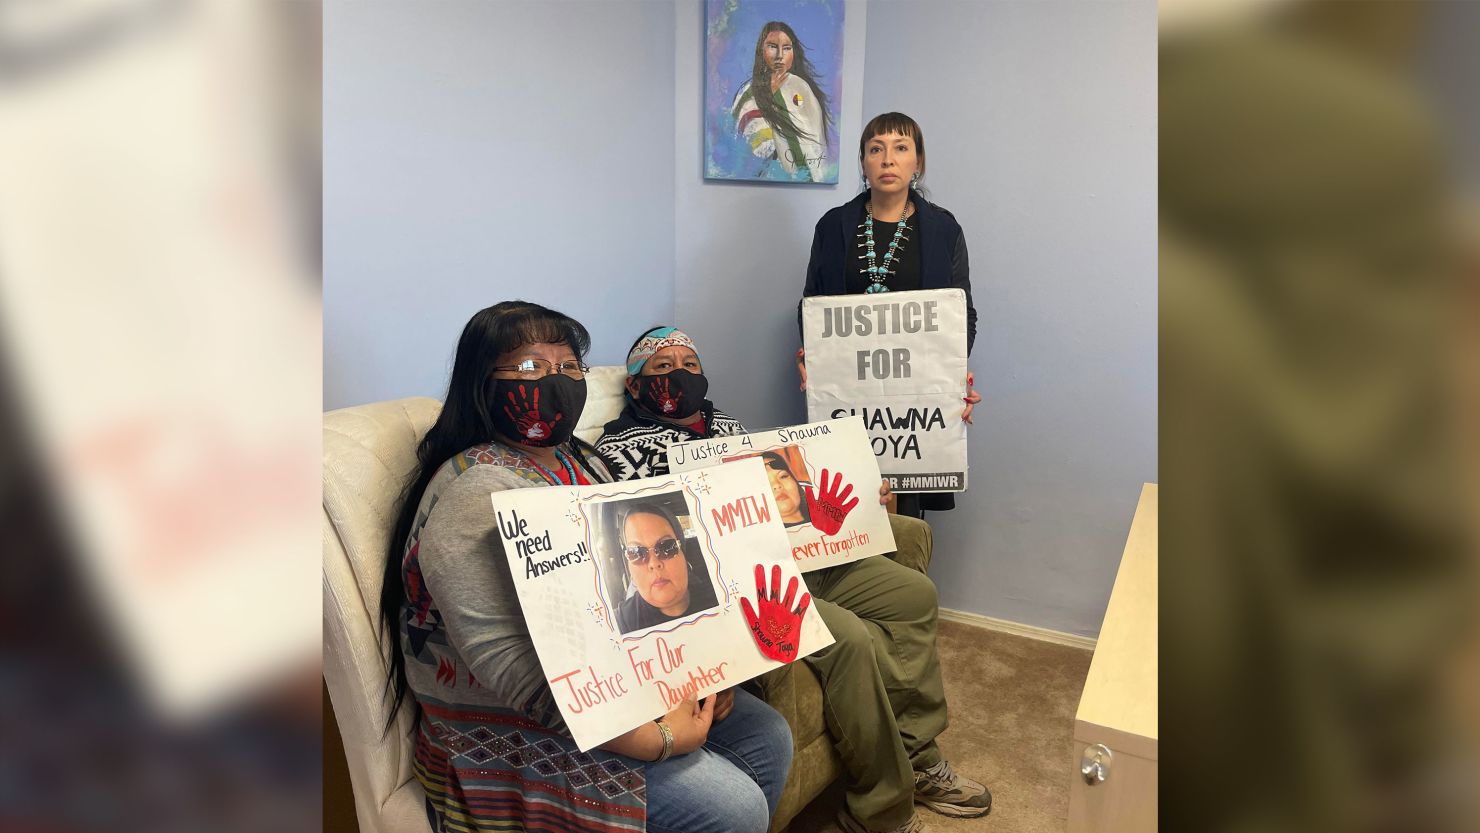 Geraldine and Benjamin Toya along with their attorney Darlene Gomez want law enforcement to further investigate the July 2021 death of their daughter Shawna in Albuquerque, New Mexico.